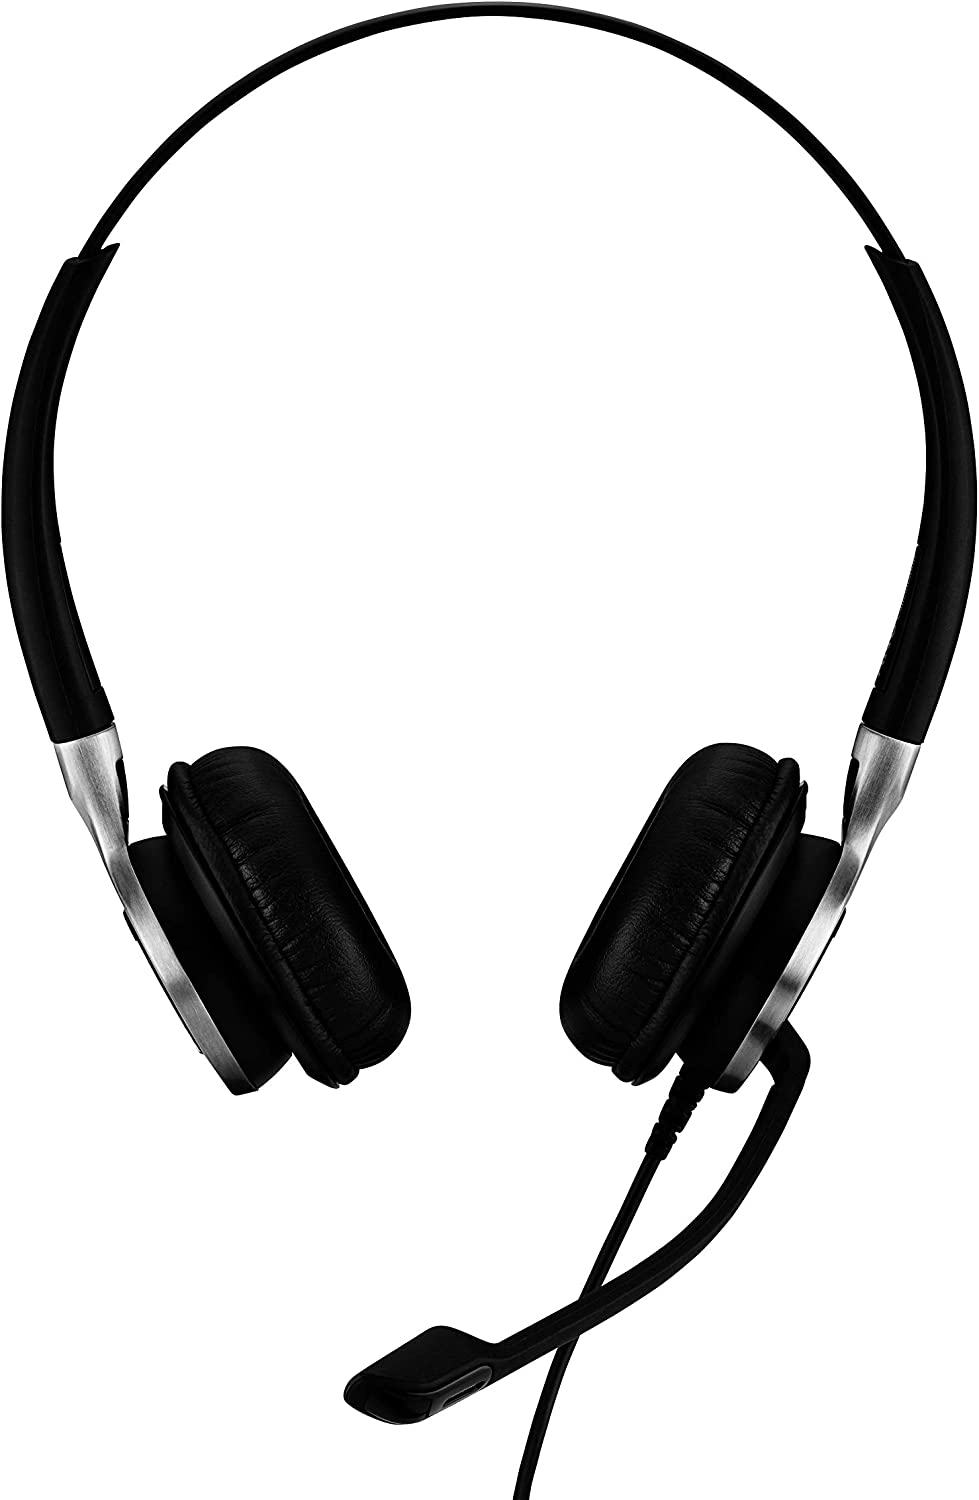 Sennheiser enterprise solution Sennheiser SC 660 ANC USB (508311) - Double-Sided (Binaural) Business Headset | for Skype for Business | with HD Sound, Active Noise Cancellation Microphone, &amp; USB Connector (Black)